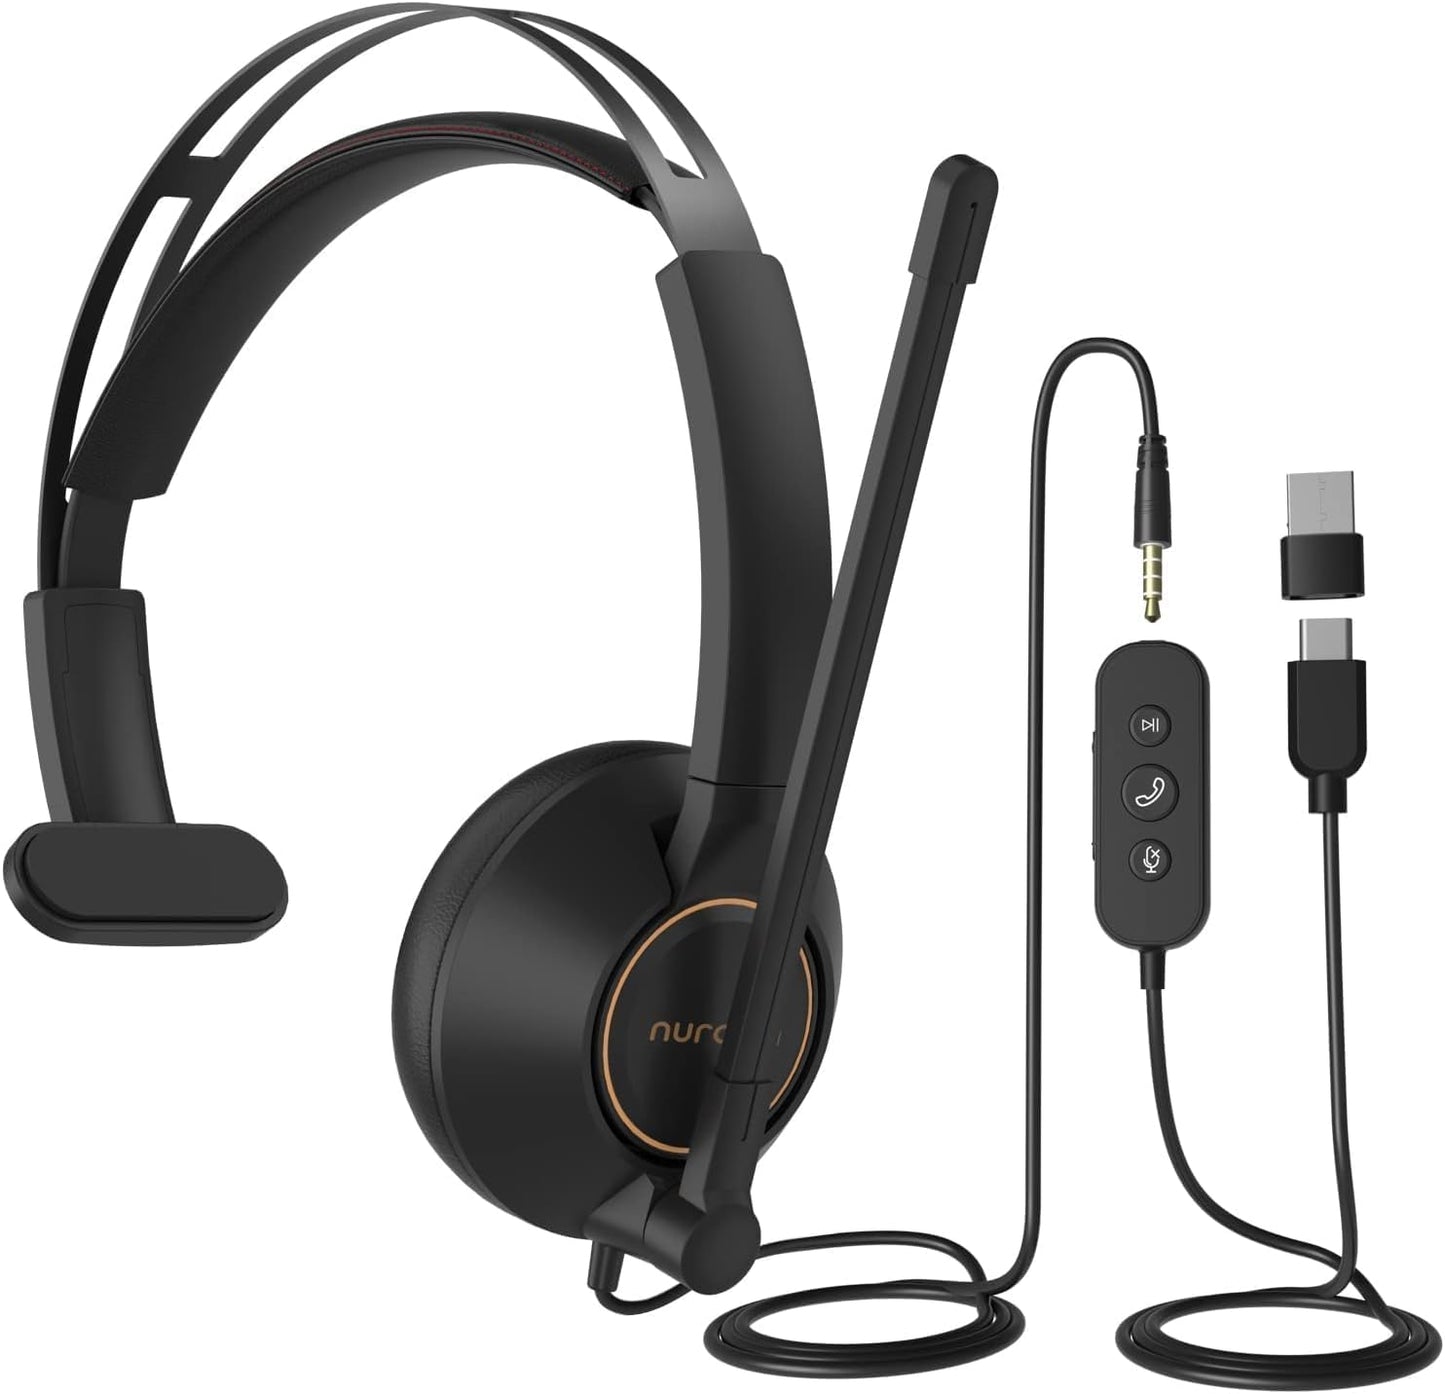 NUROUM Wired Headset, Single-Ear (Mono) Headphones with Noise Canceling Microphone, On Ear Computer Headset with in-line Control, USB/Type-C, PC Headset for Home Office Online Class Skype Zoom